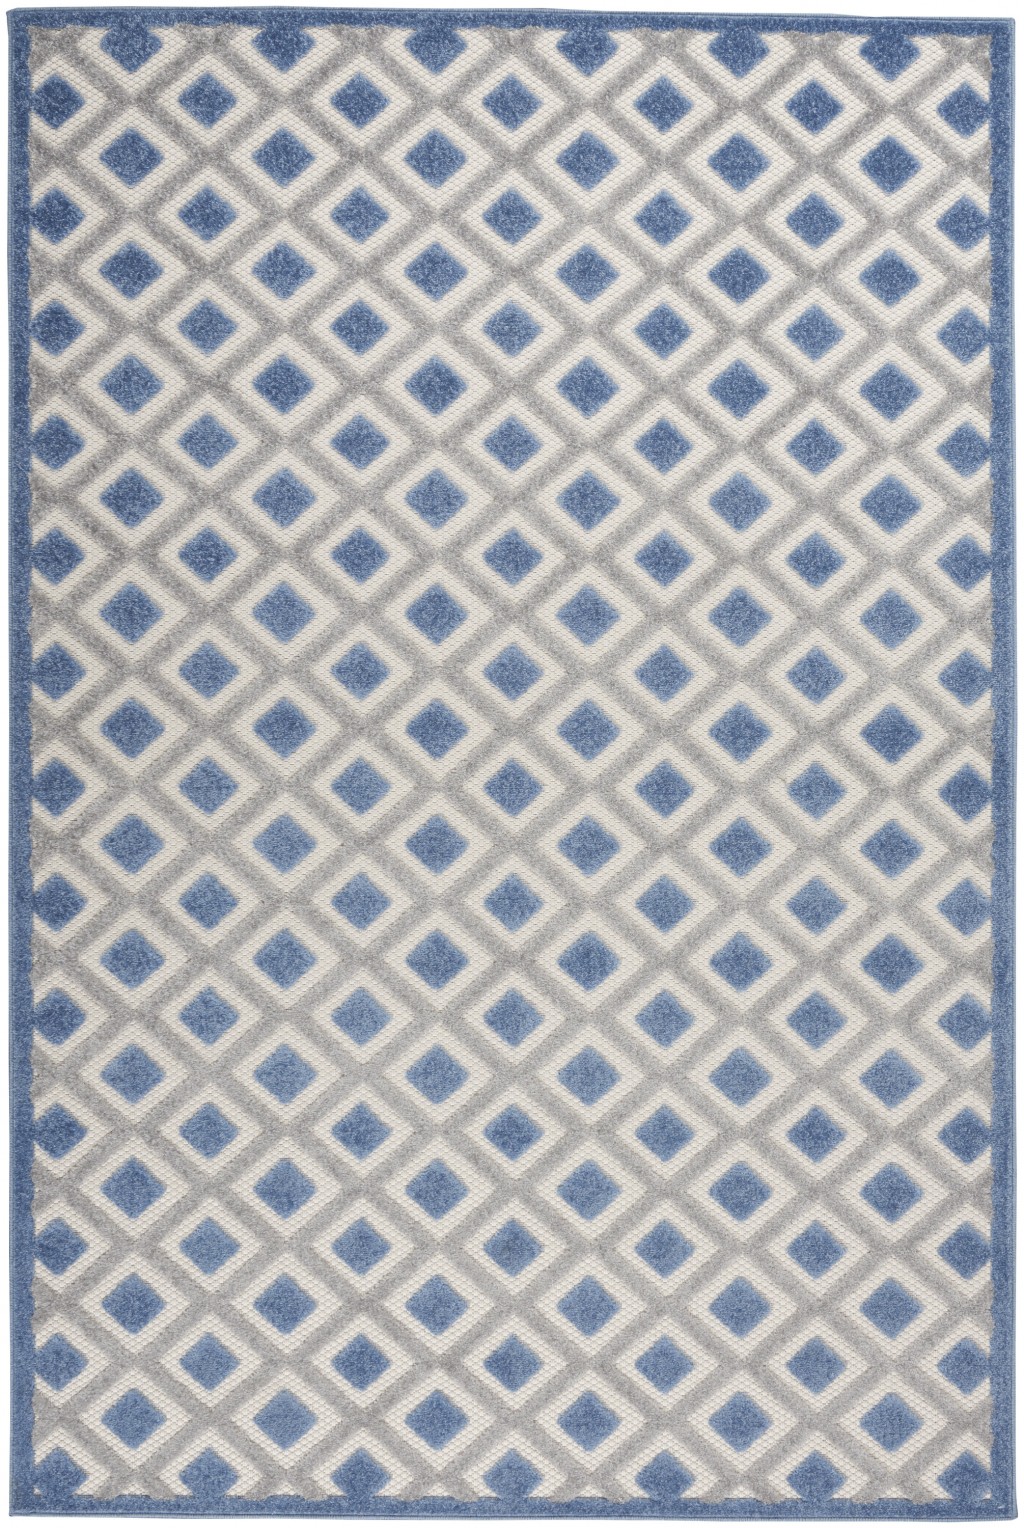 4' X 6' Blue And Gray Geometric Indoor Outdoor Area Rug-385147-1